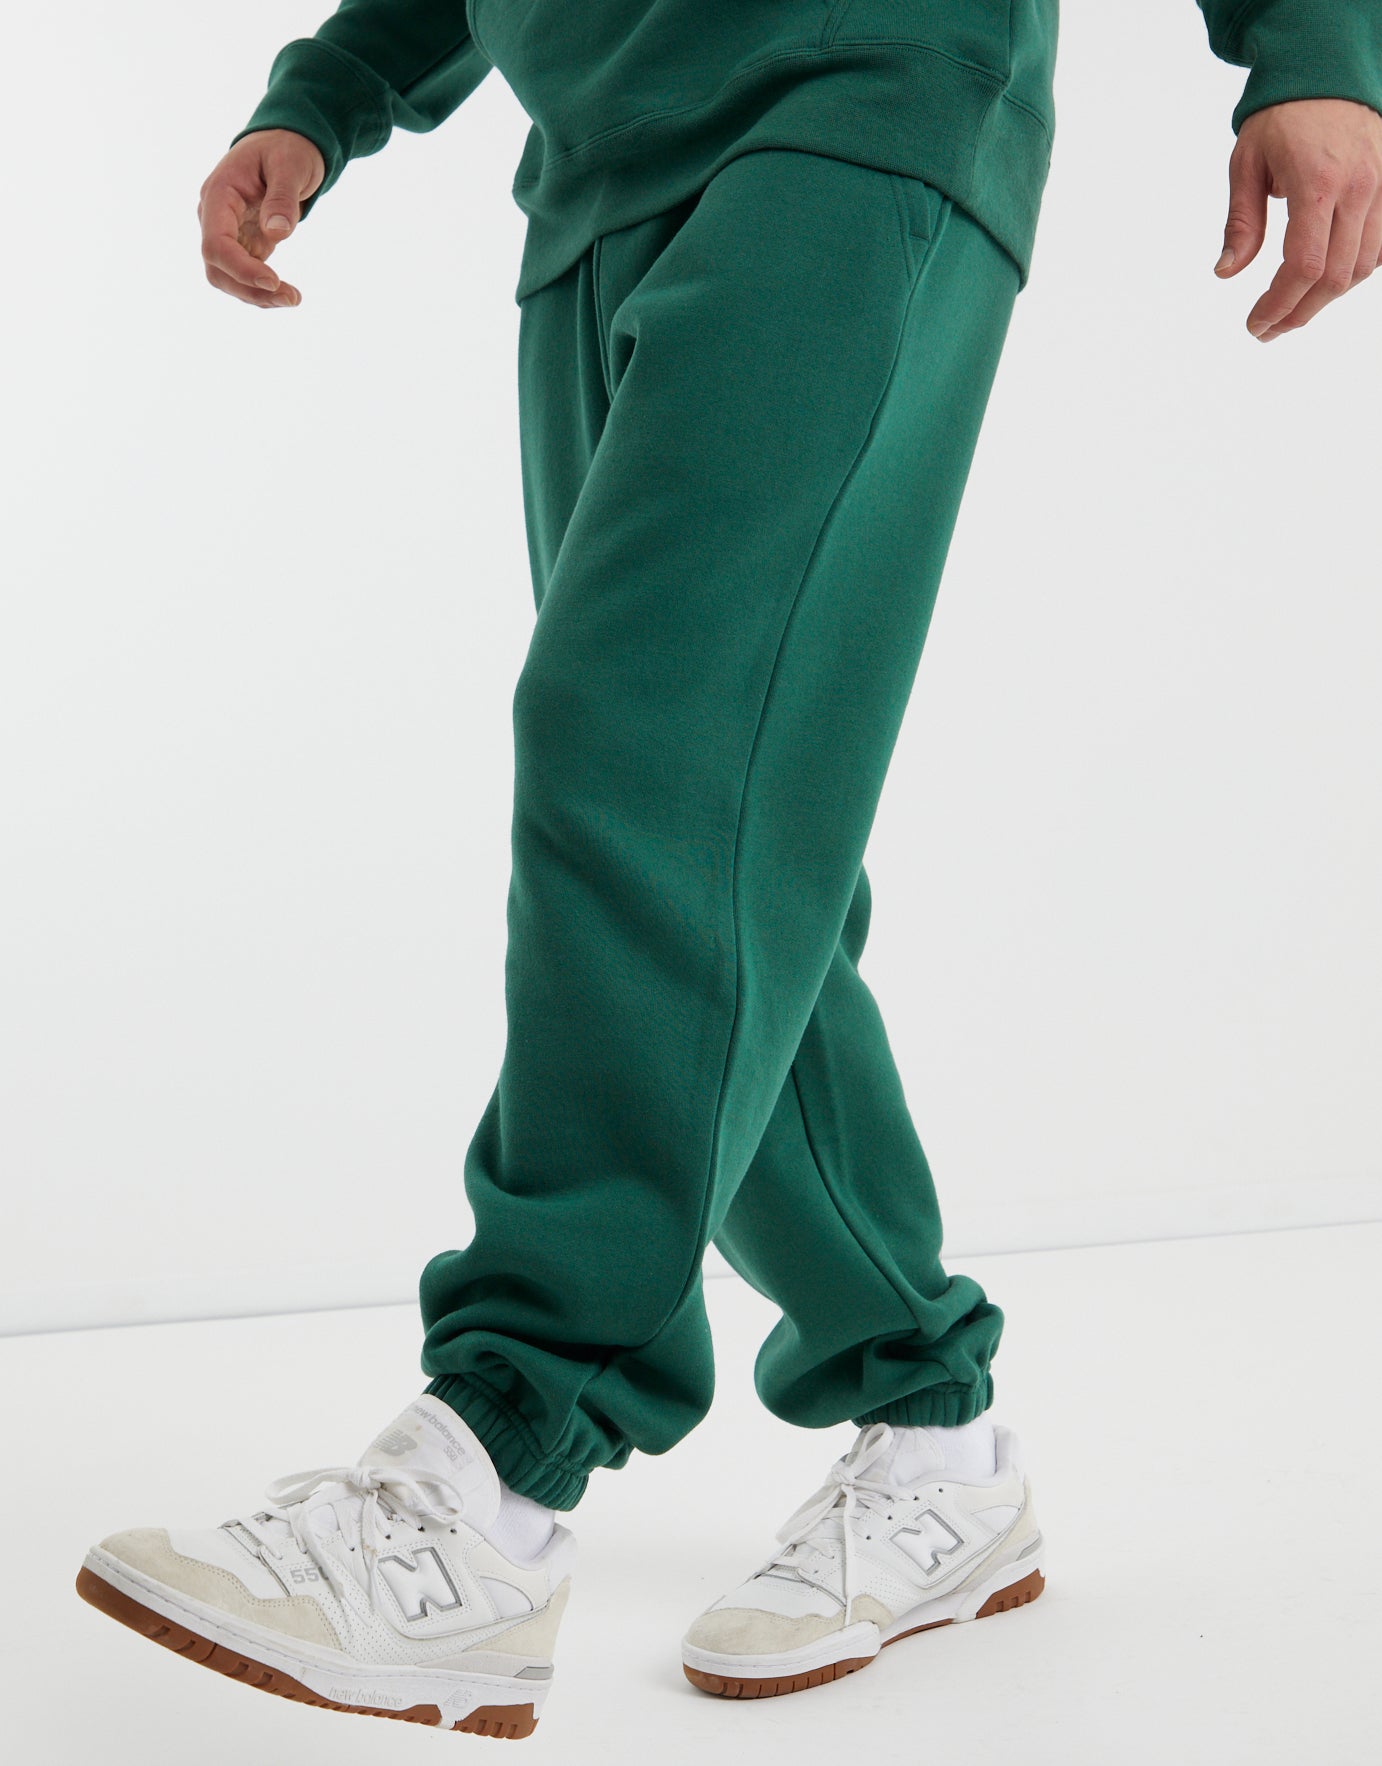 olive green joggers outfit men